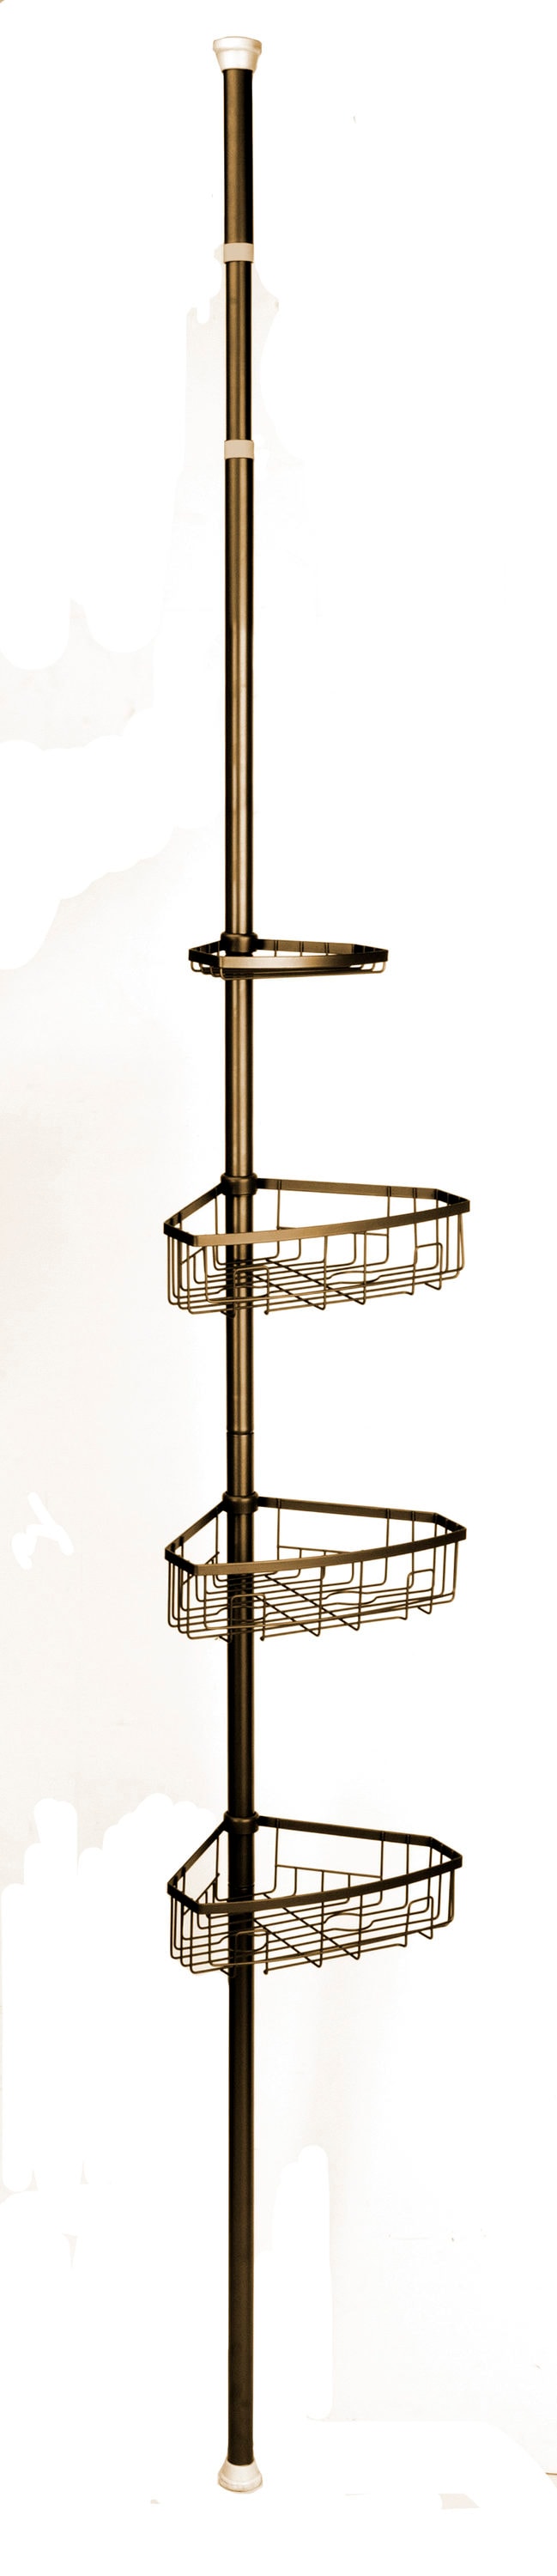 Oil-Rubbed Bronze Hanging Shower Caddy